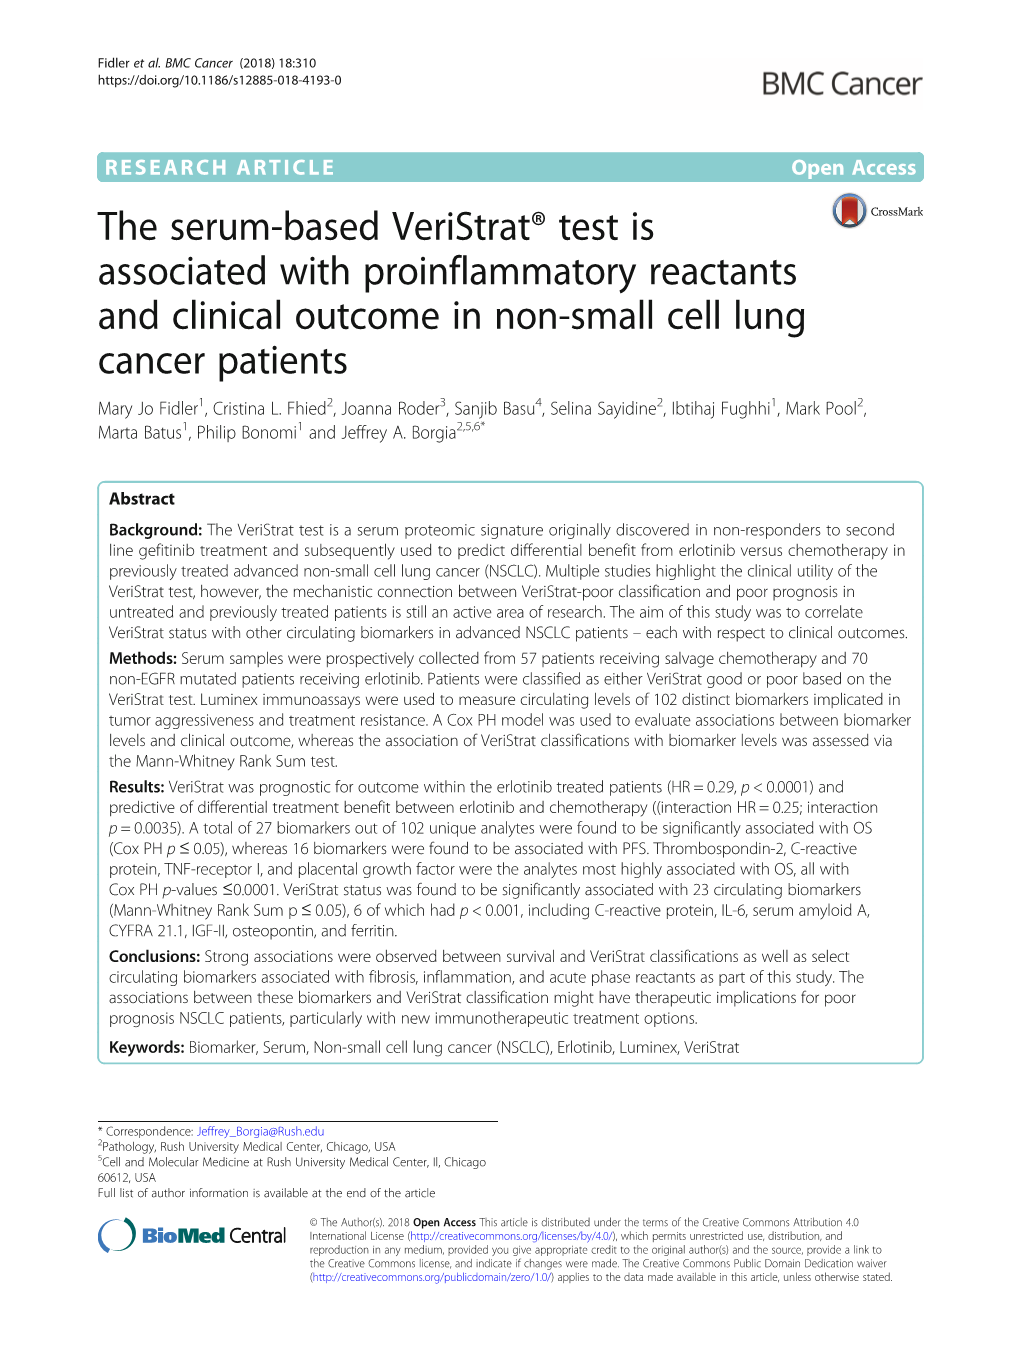 The Serum-Based Veristrat® Test Is Associated with Proinflammatory Reactants and Clinical Outcome in Non-Small Cell Lung Cancer Patients Mary Jo Fidler1, Cristina L